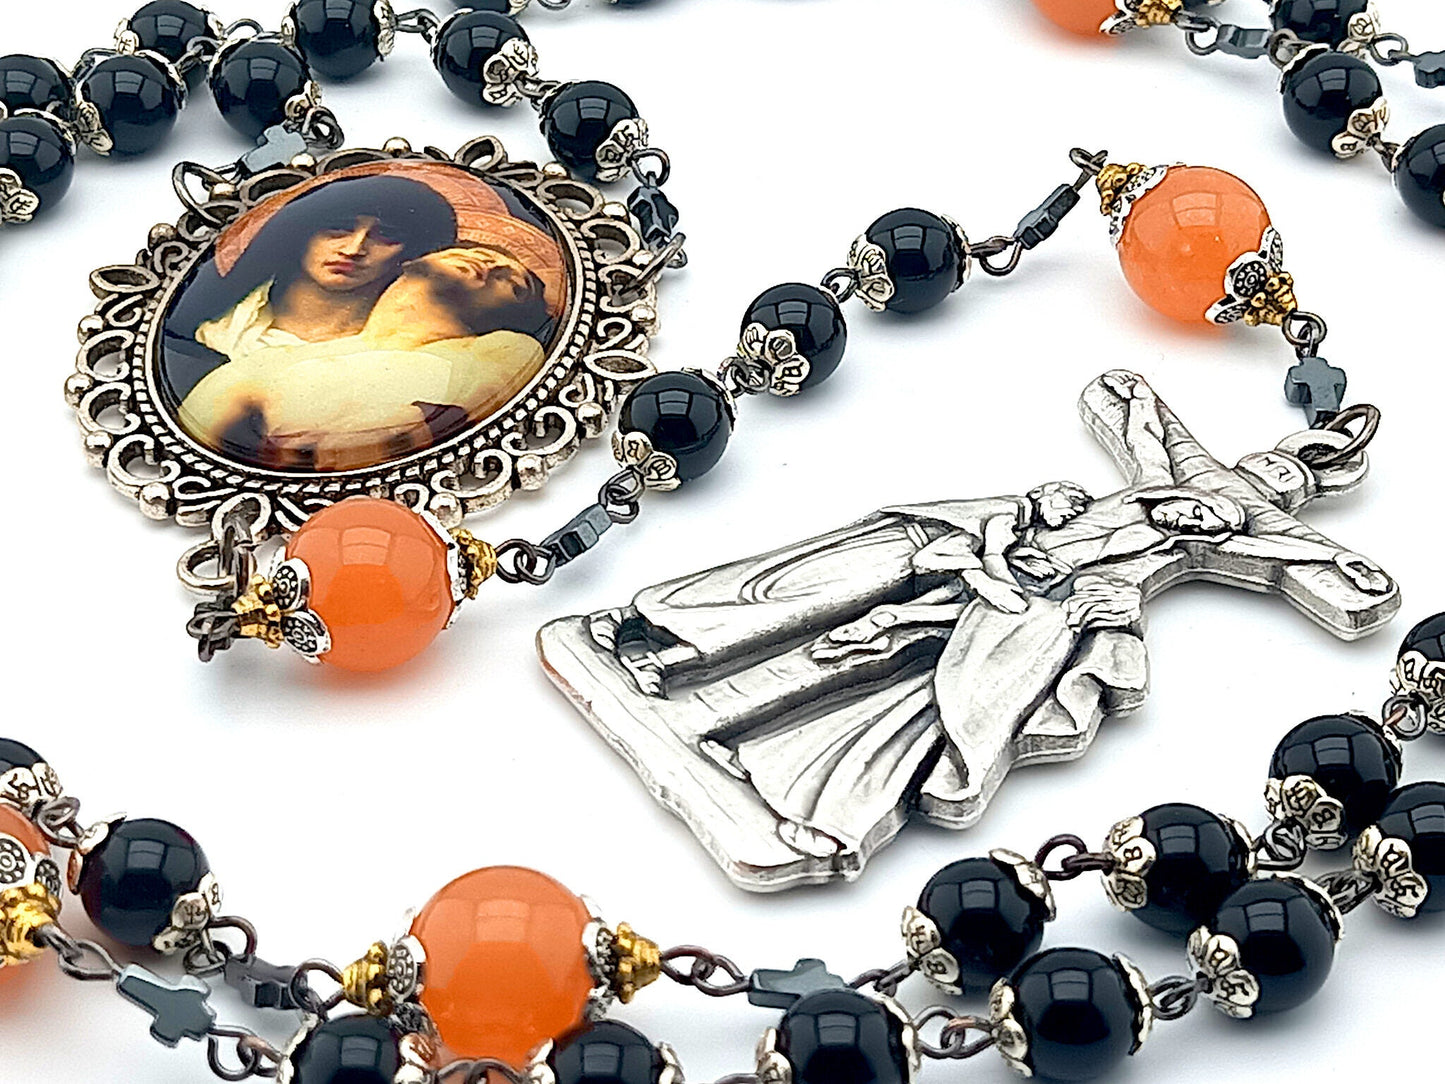 Our Lady of Sorrows unique rosary beads with onyx and orange agate gemstone beads, La Pieta crucifix and large picture centre medal.